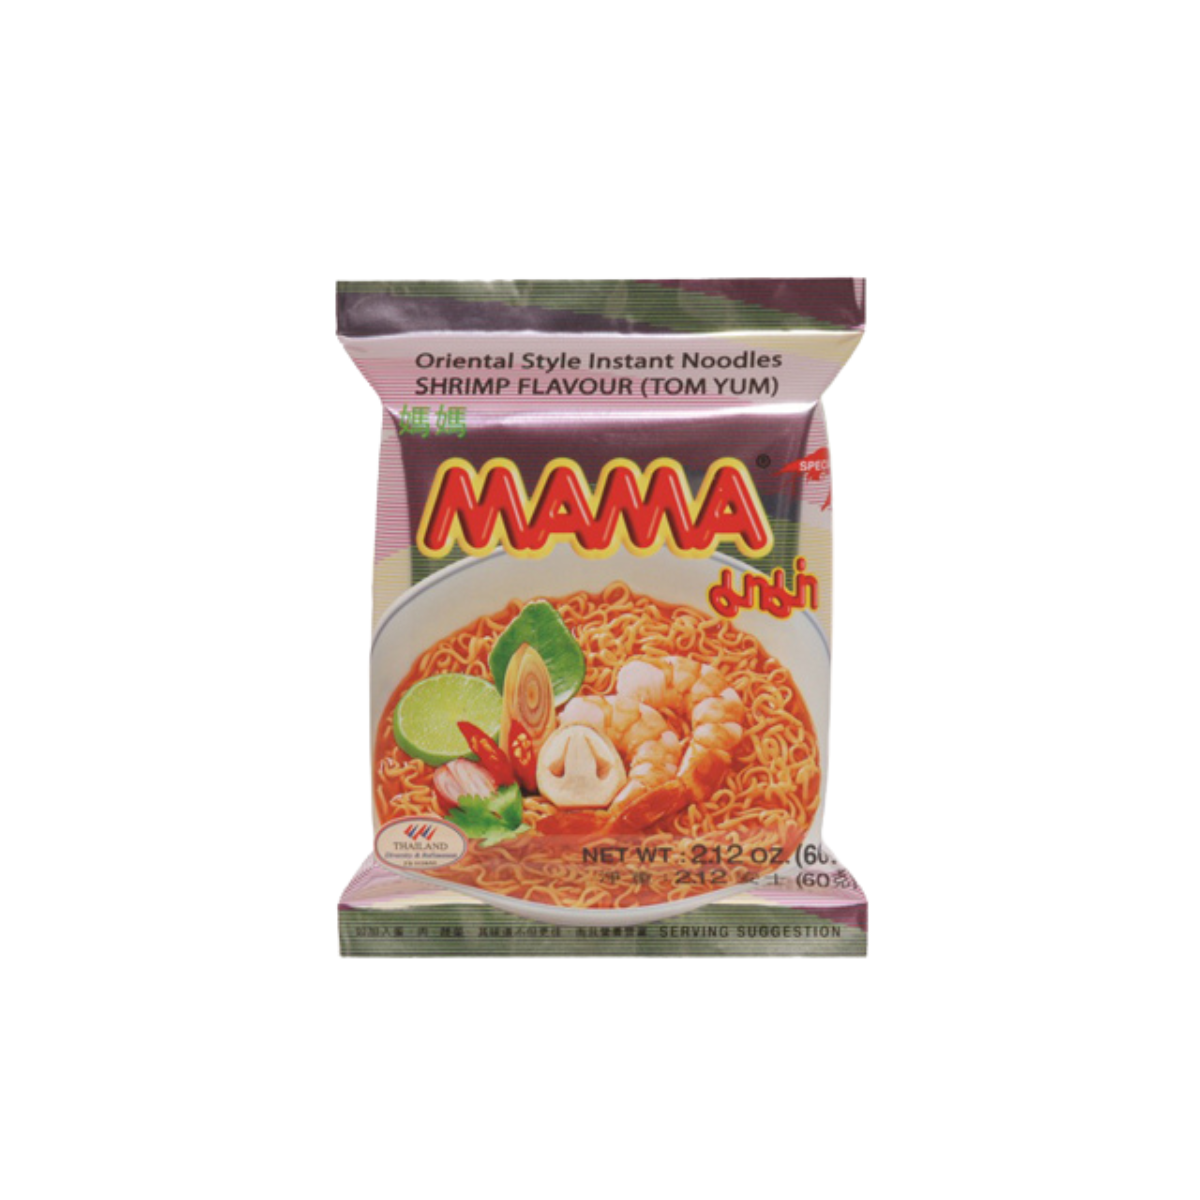 Yum Yum Instant Chicken Noodles 60 g - Fast shipping in